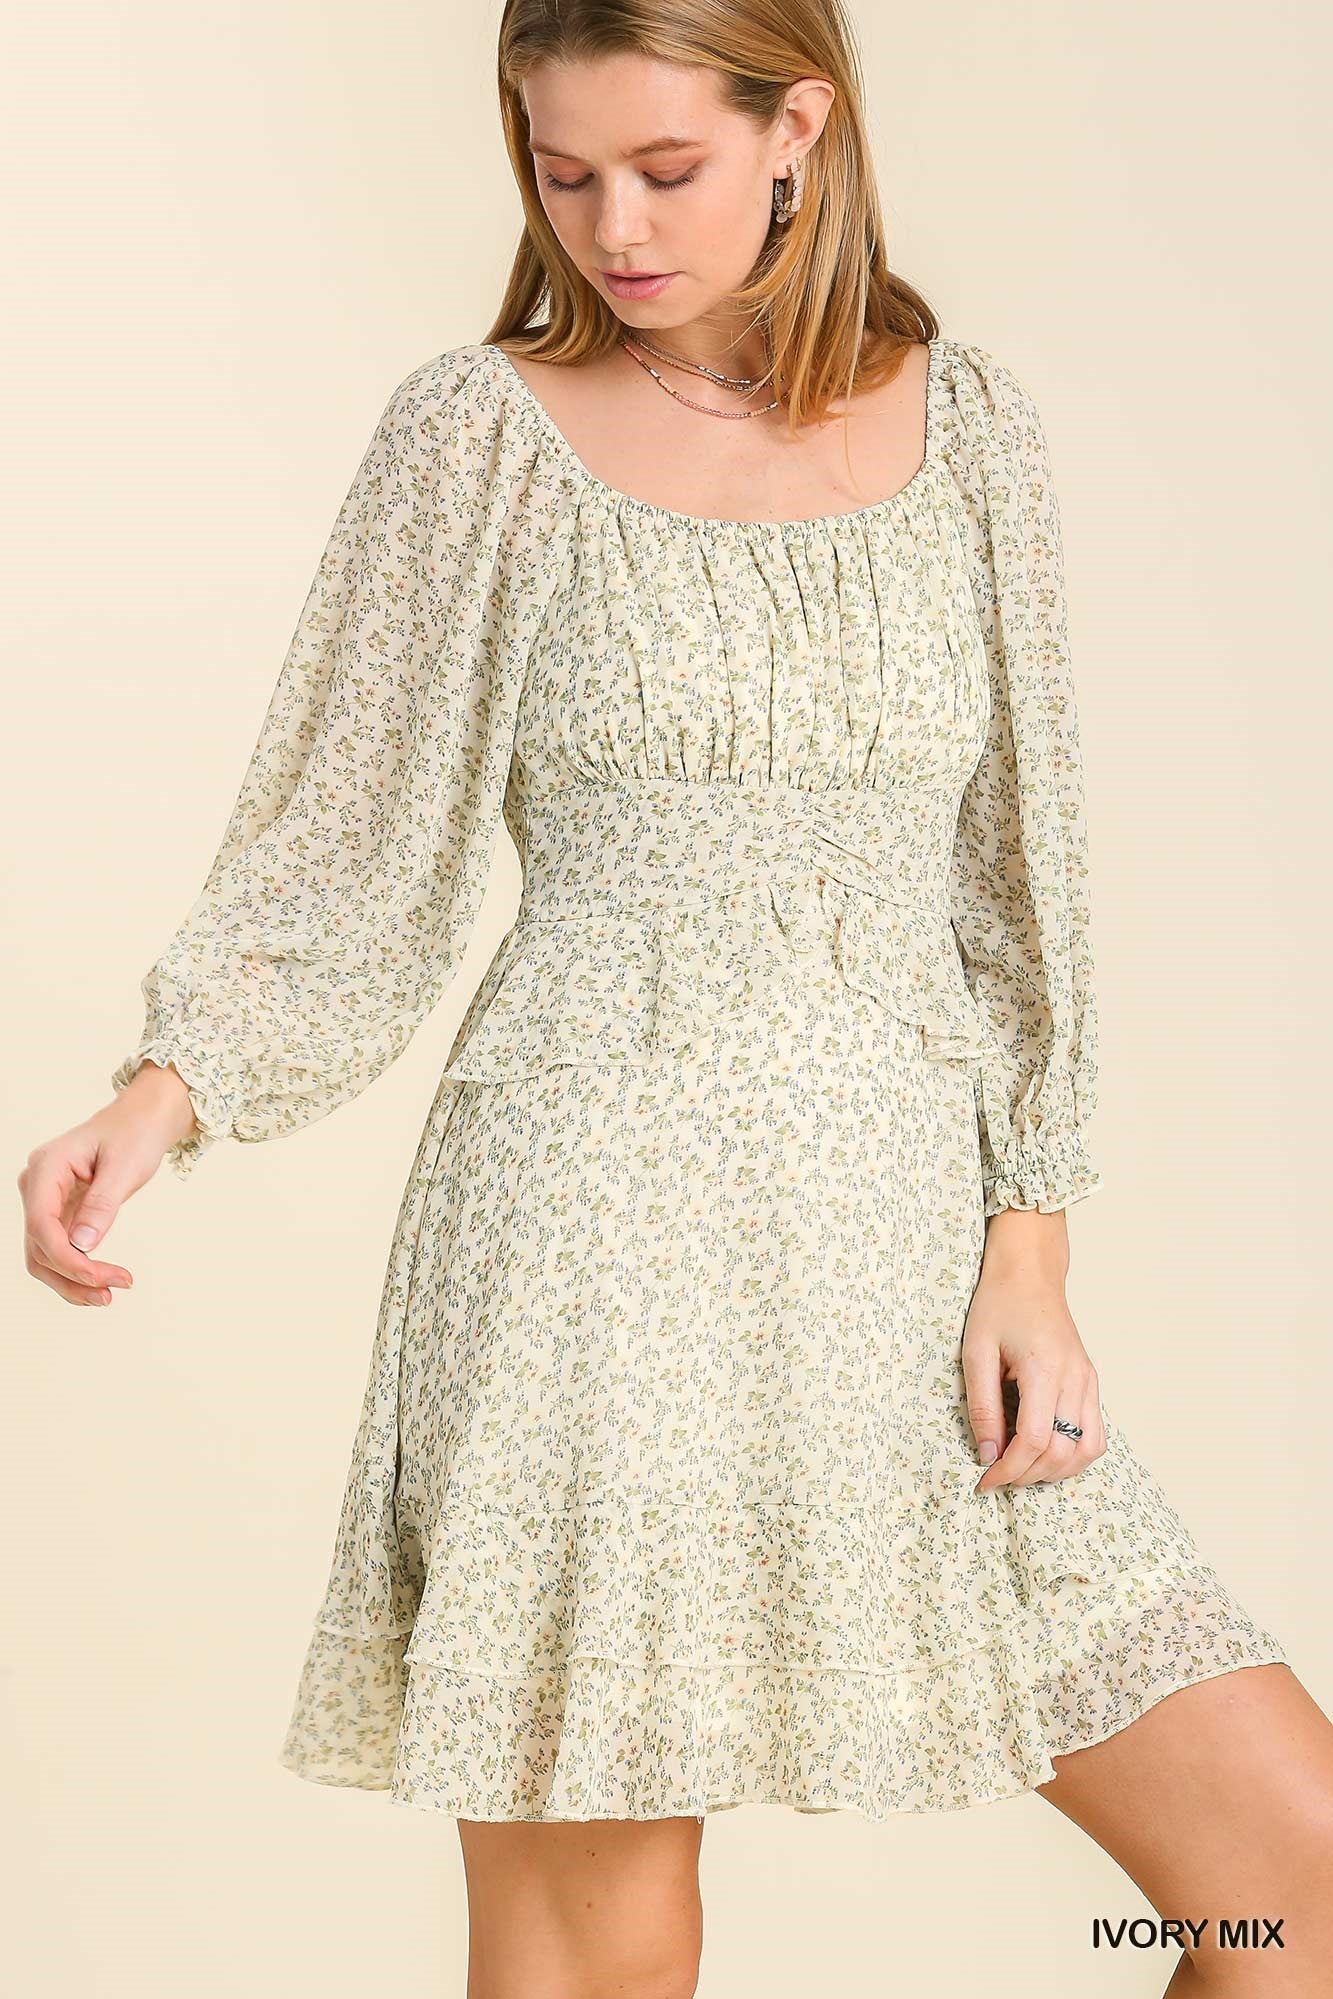 Umgee Floral Print Long Cuffed Sleeve Ruffle Layered Ends Dress - Roulhac Fashion Boutique